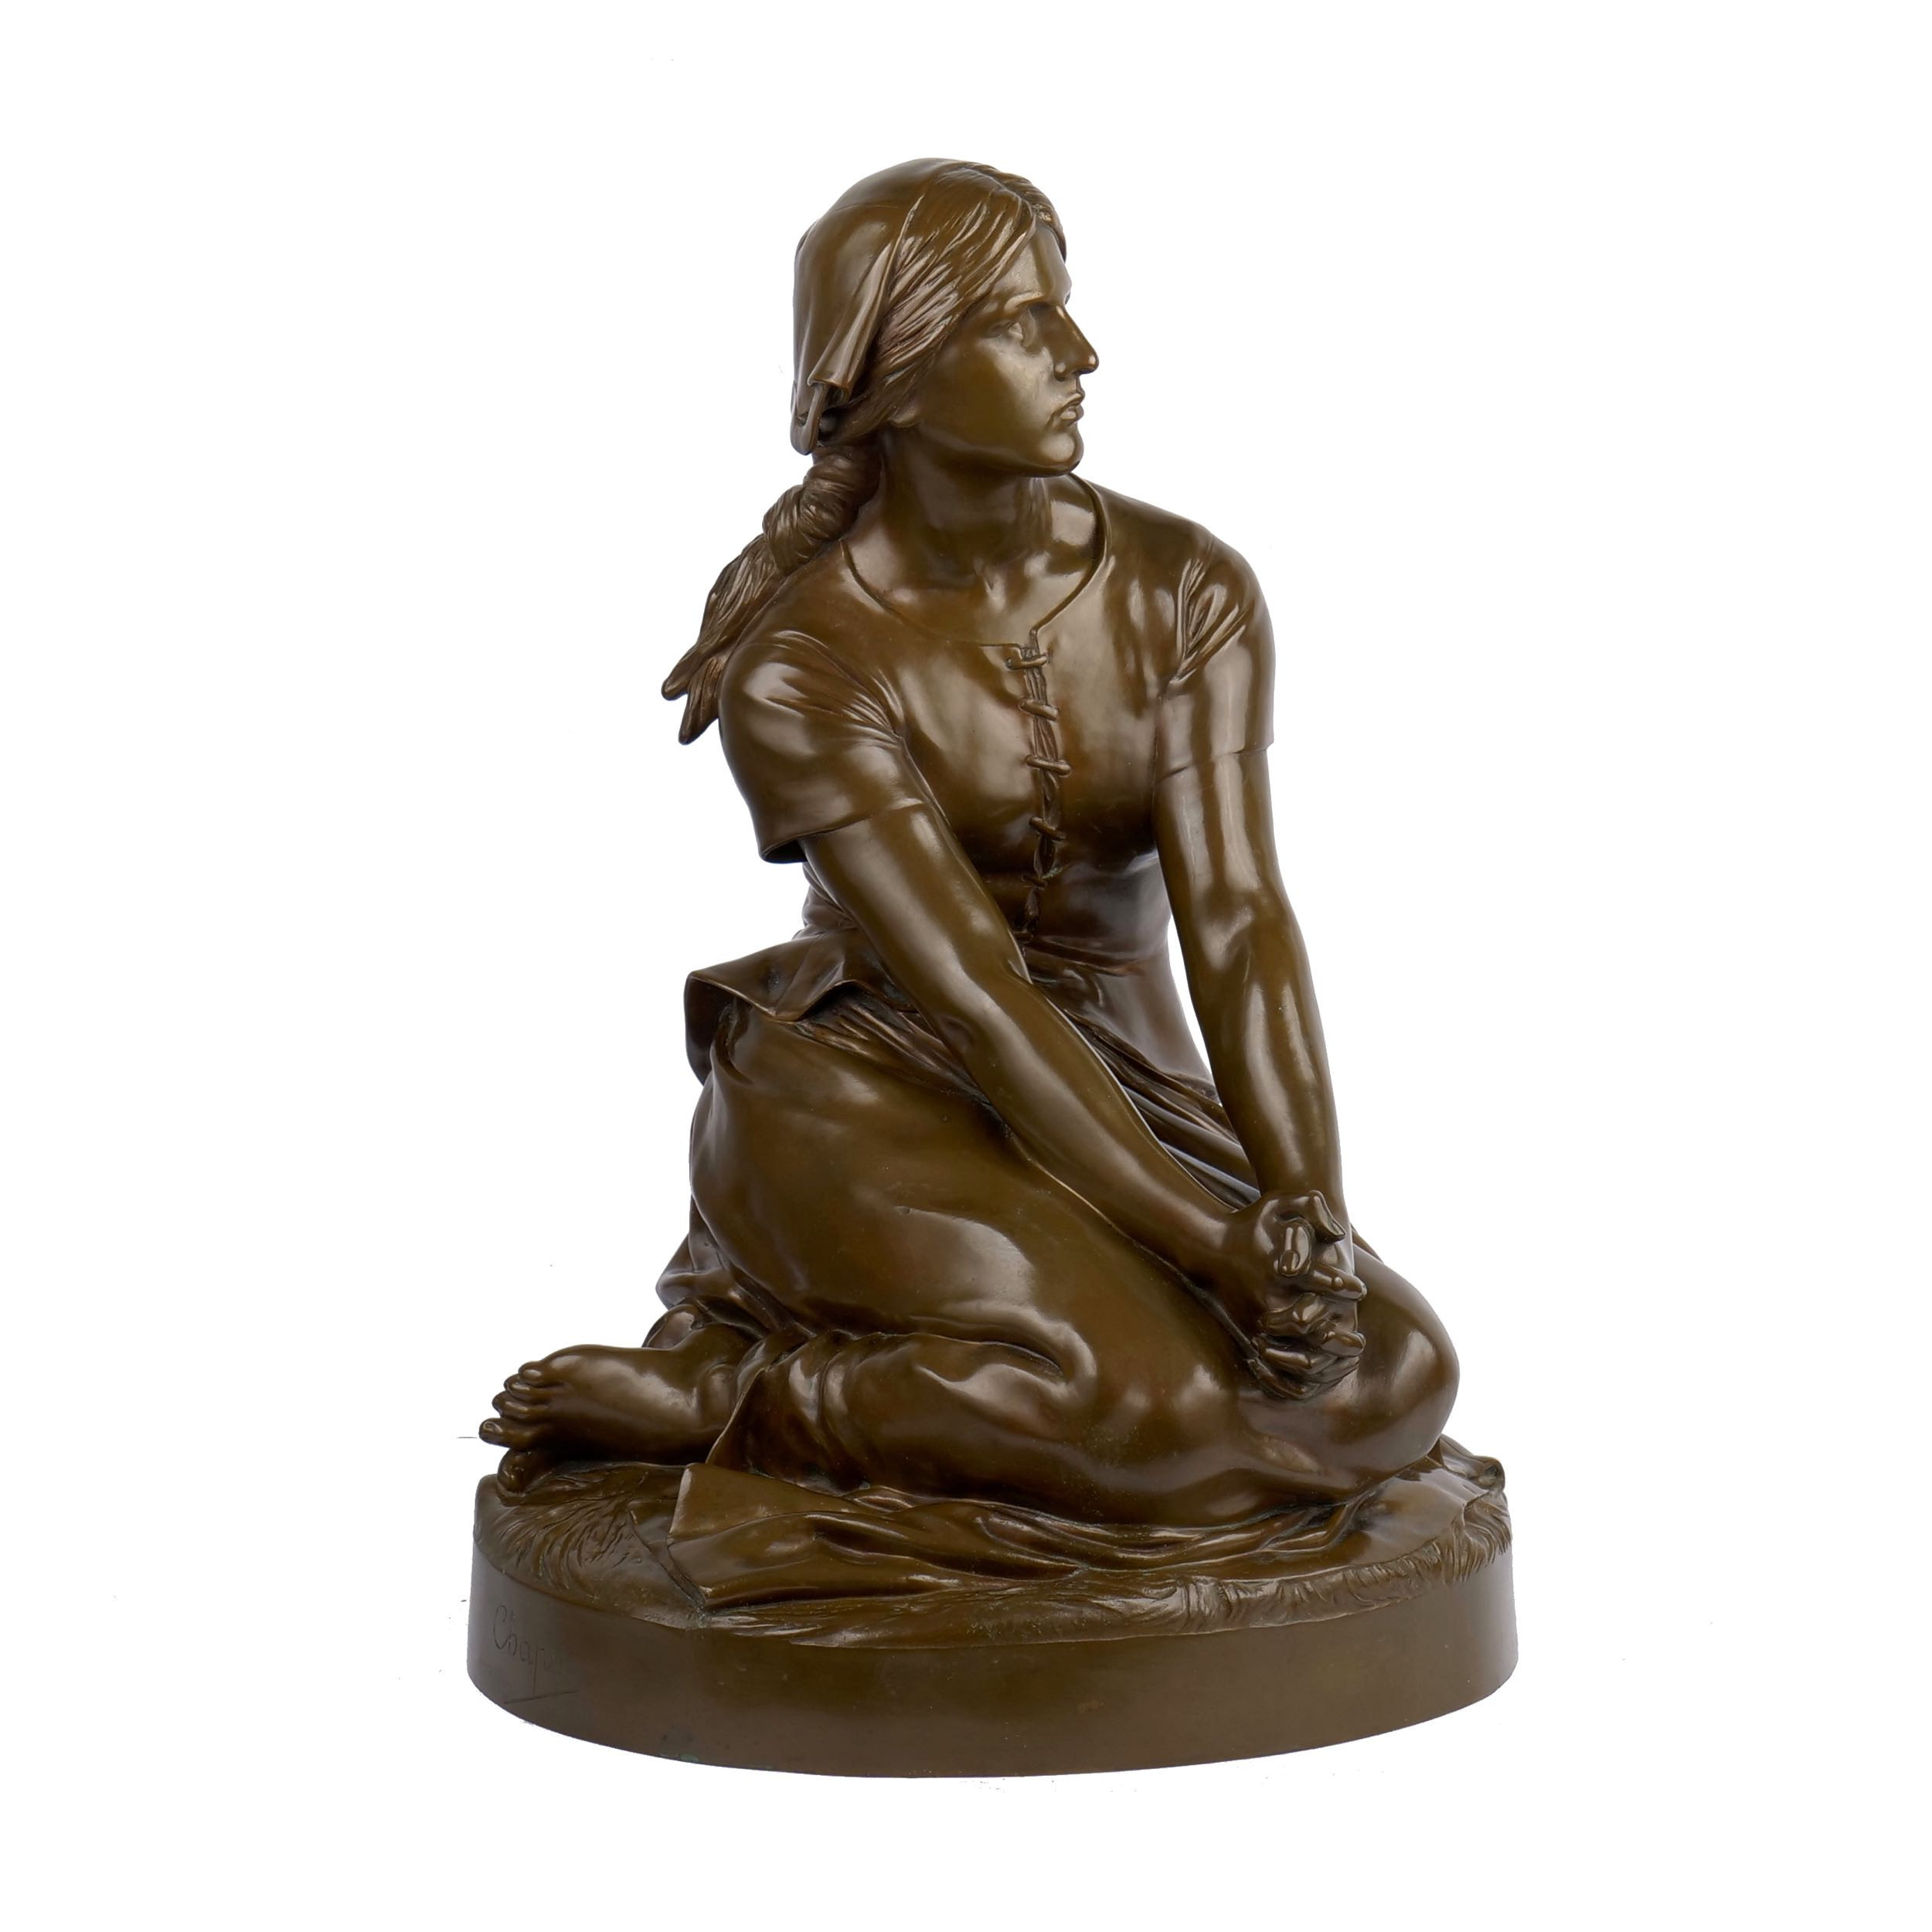 Bronze “Joan of Arc” after model by Chapu (French, 1833-91)